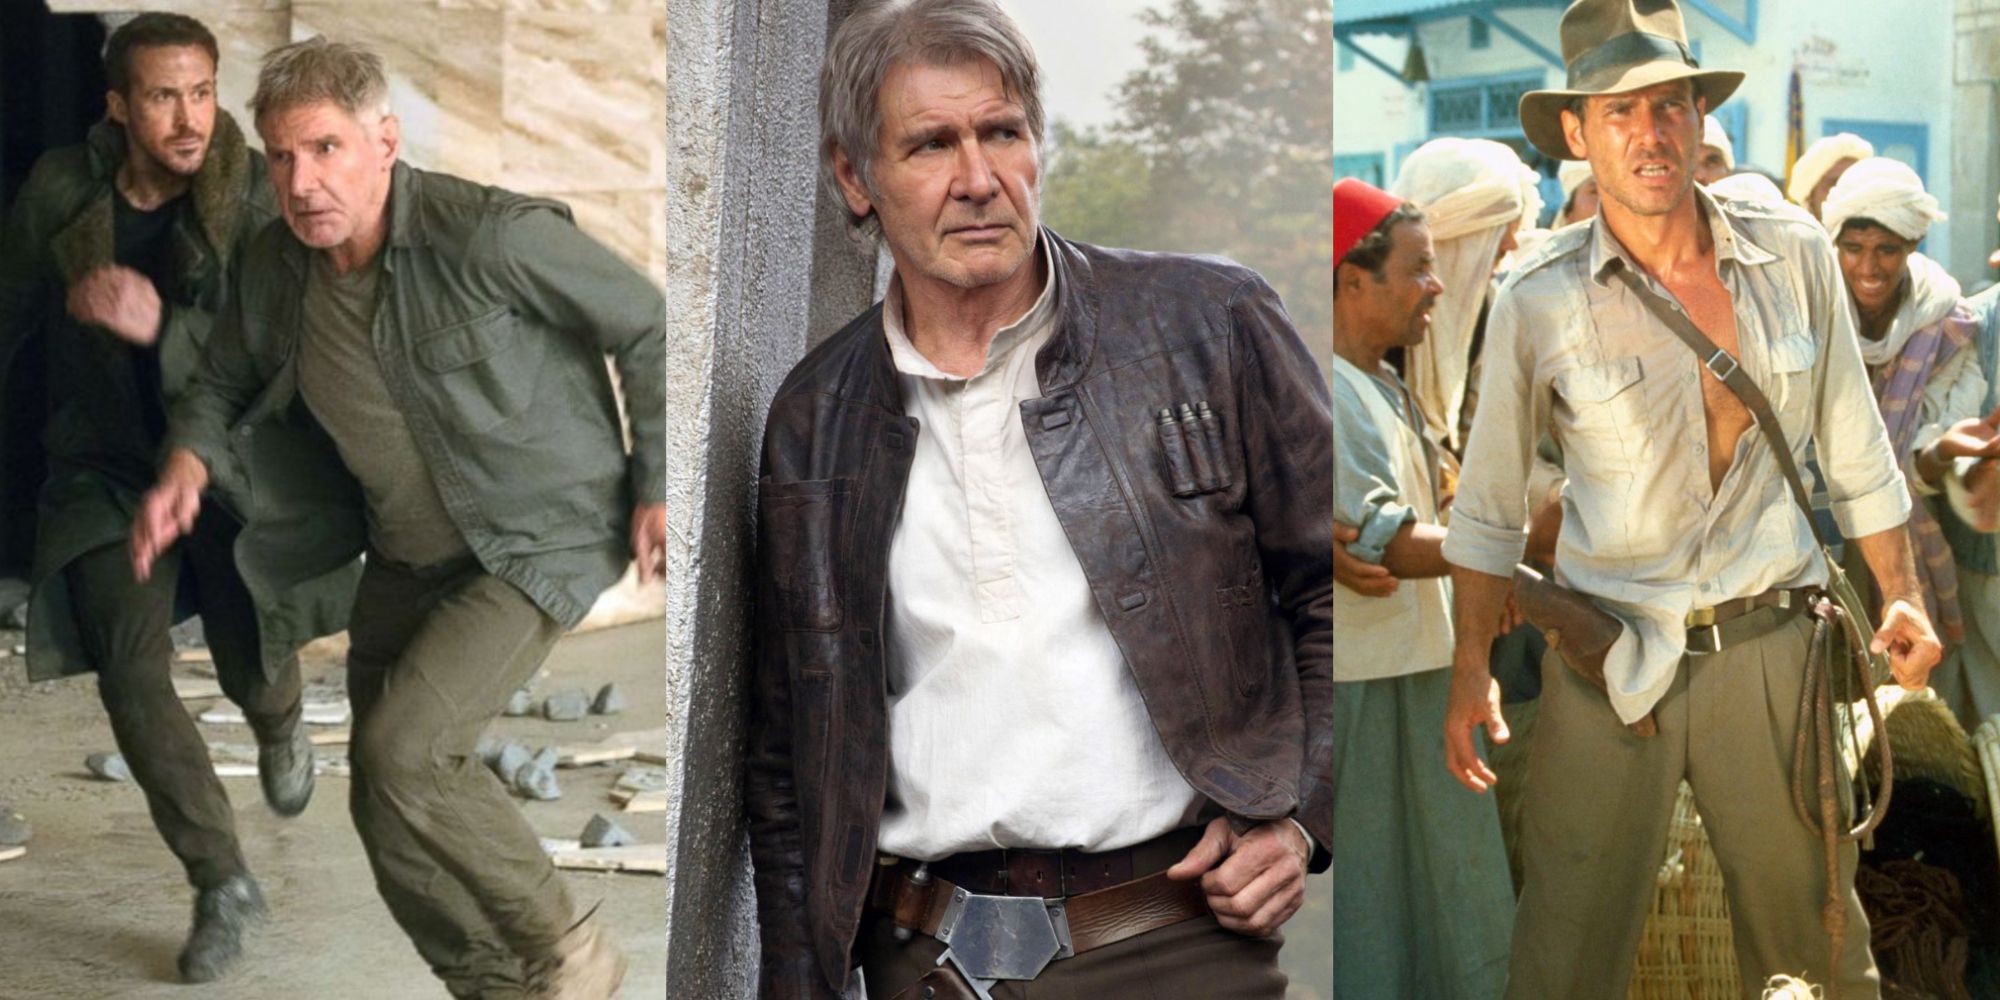 Image of Harrison Ford in Blade Runner, Star Wars and Indiana Jones